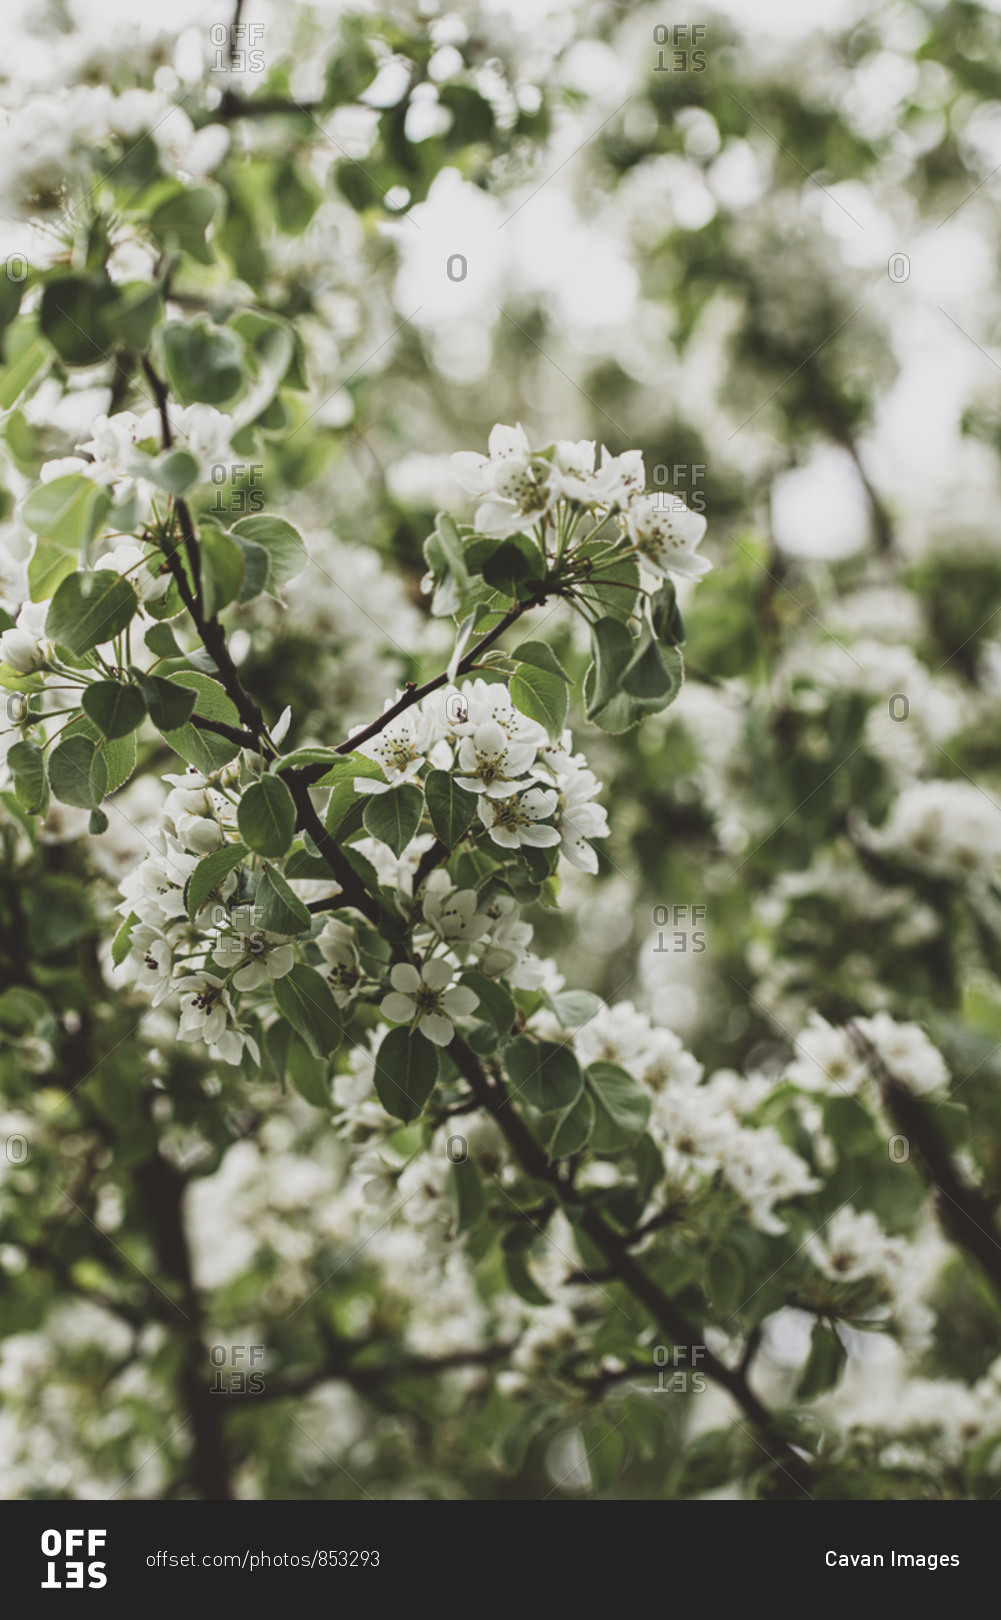 Branches of a tree covered in white flowers in the spring.